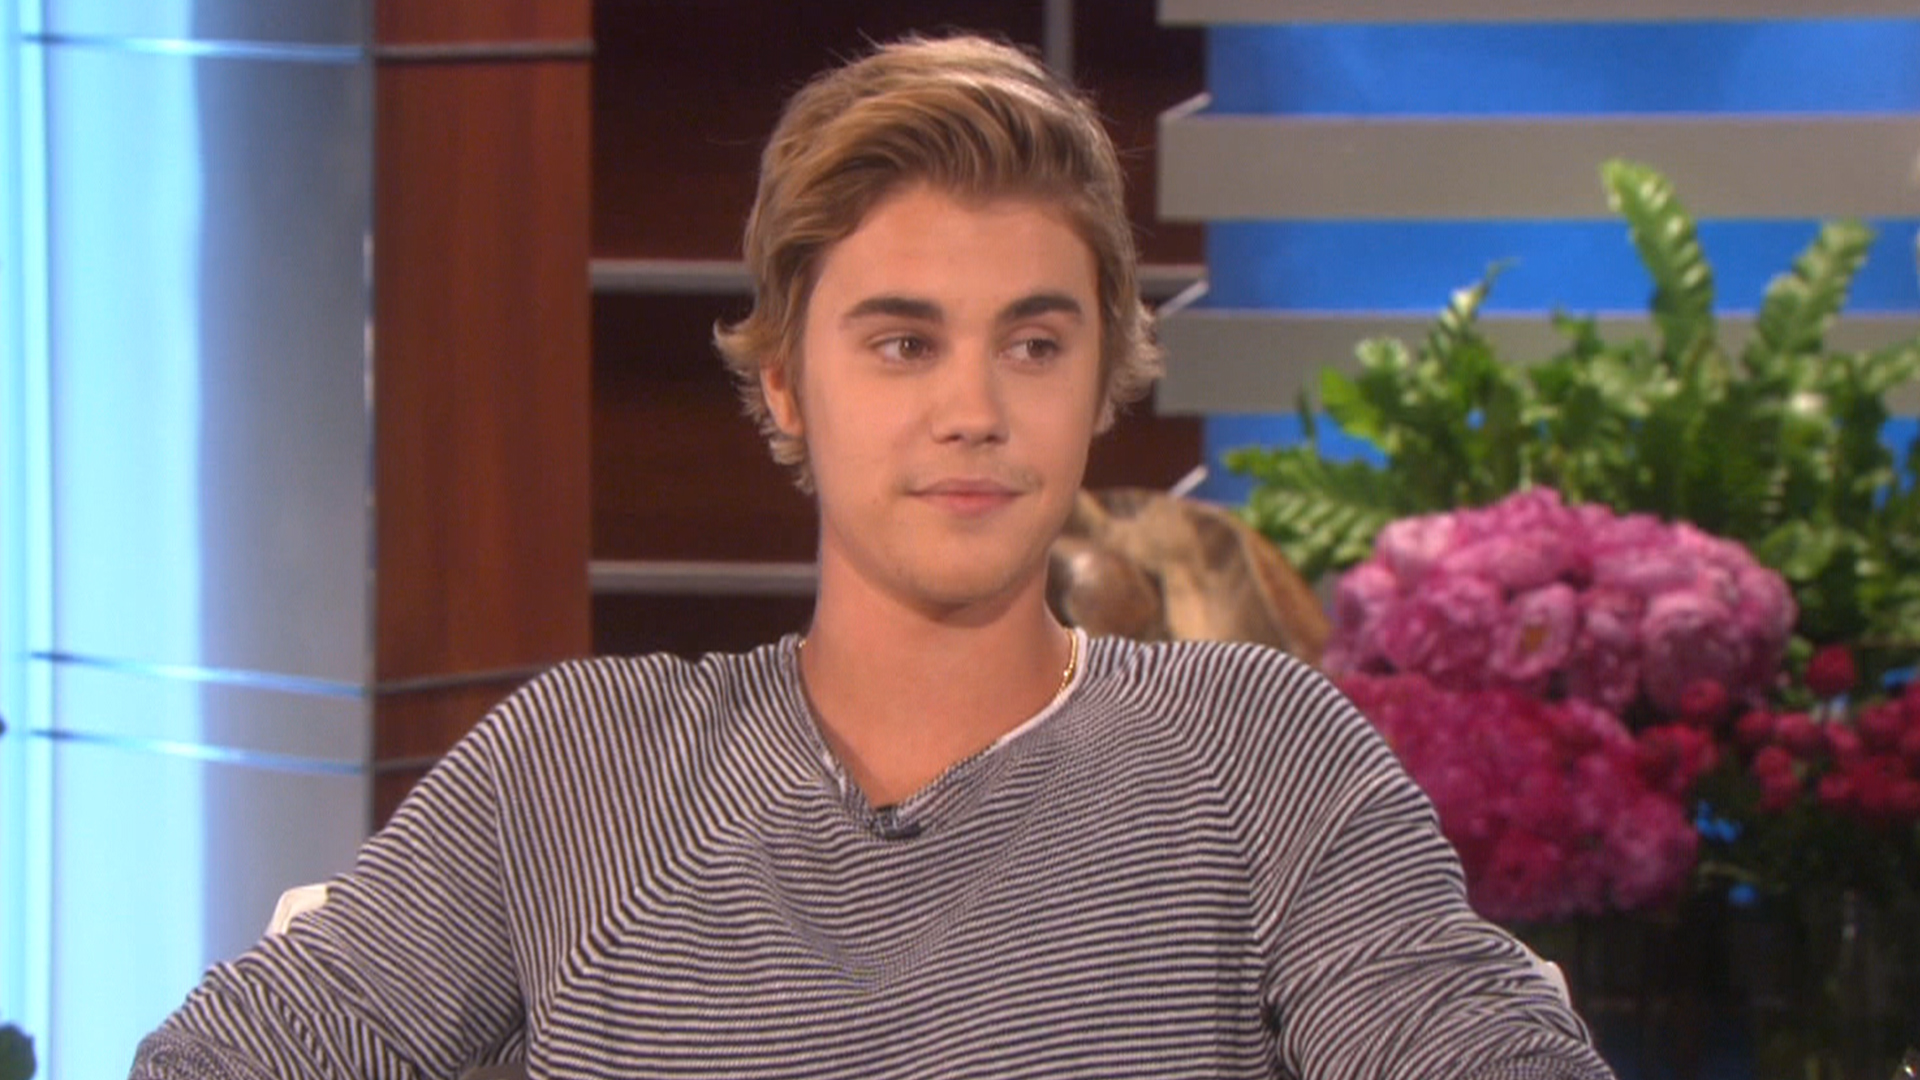 Justin Bieber releases apology video: I'm 'not who I was pretending to be' - TODAY.com